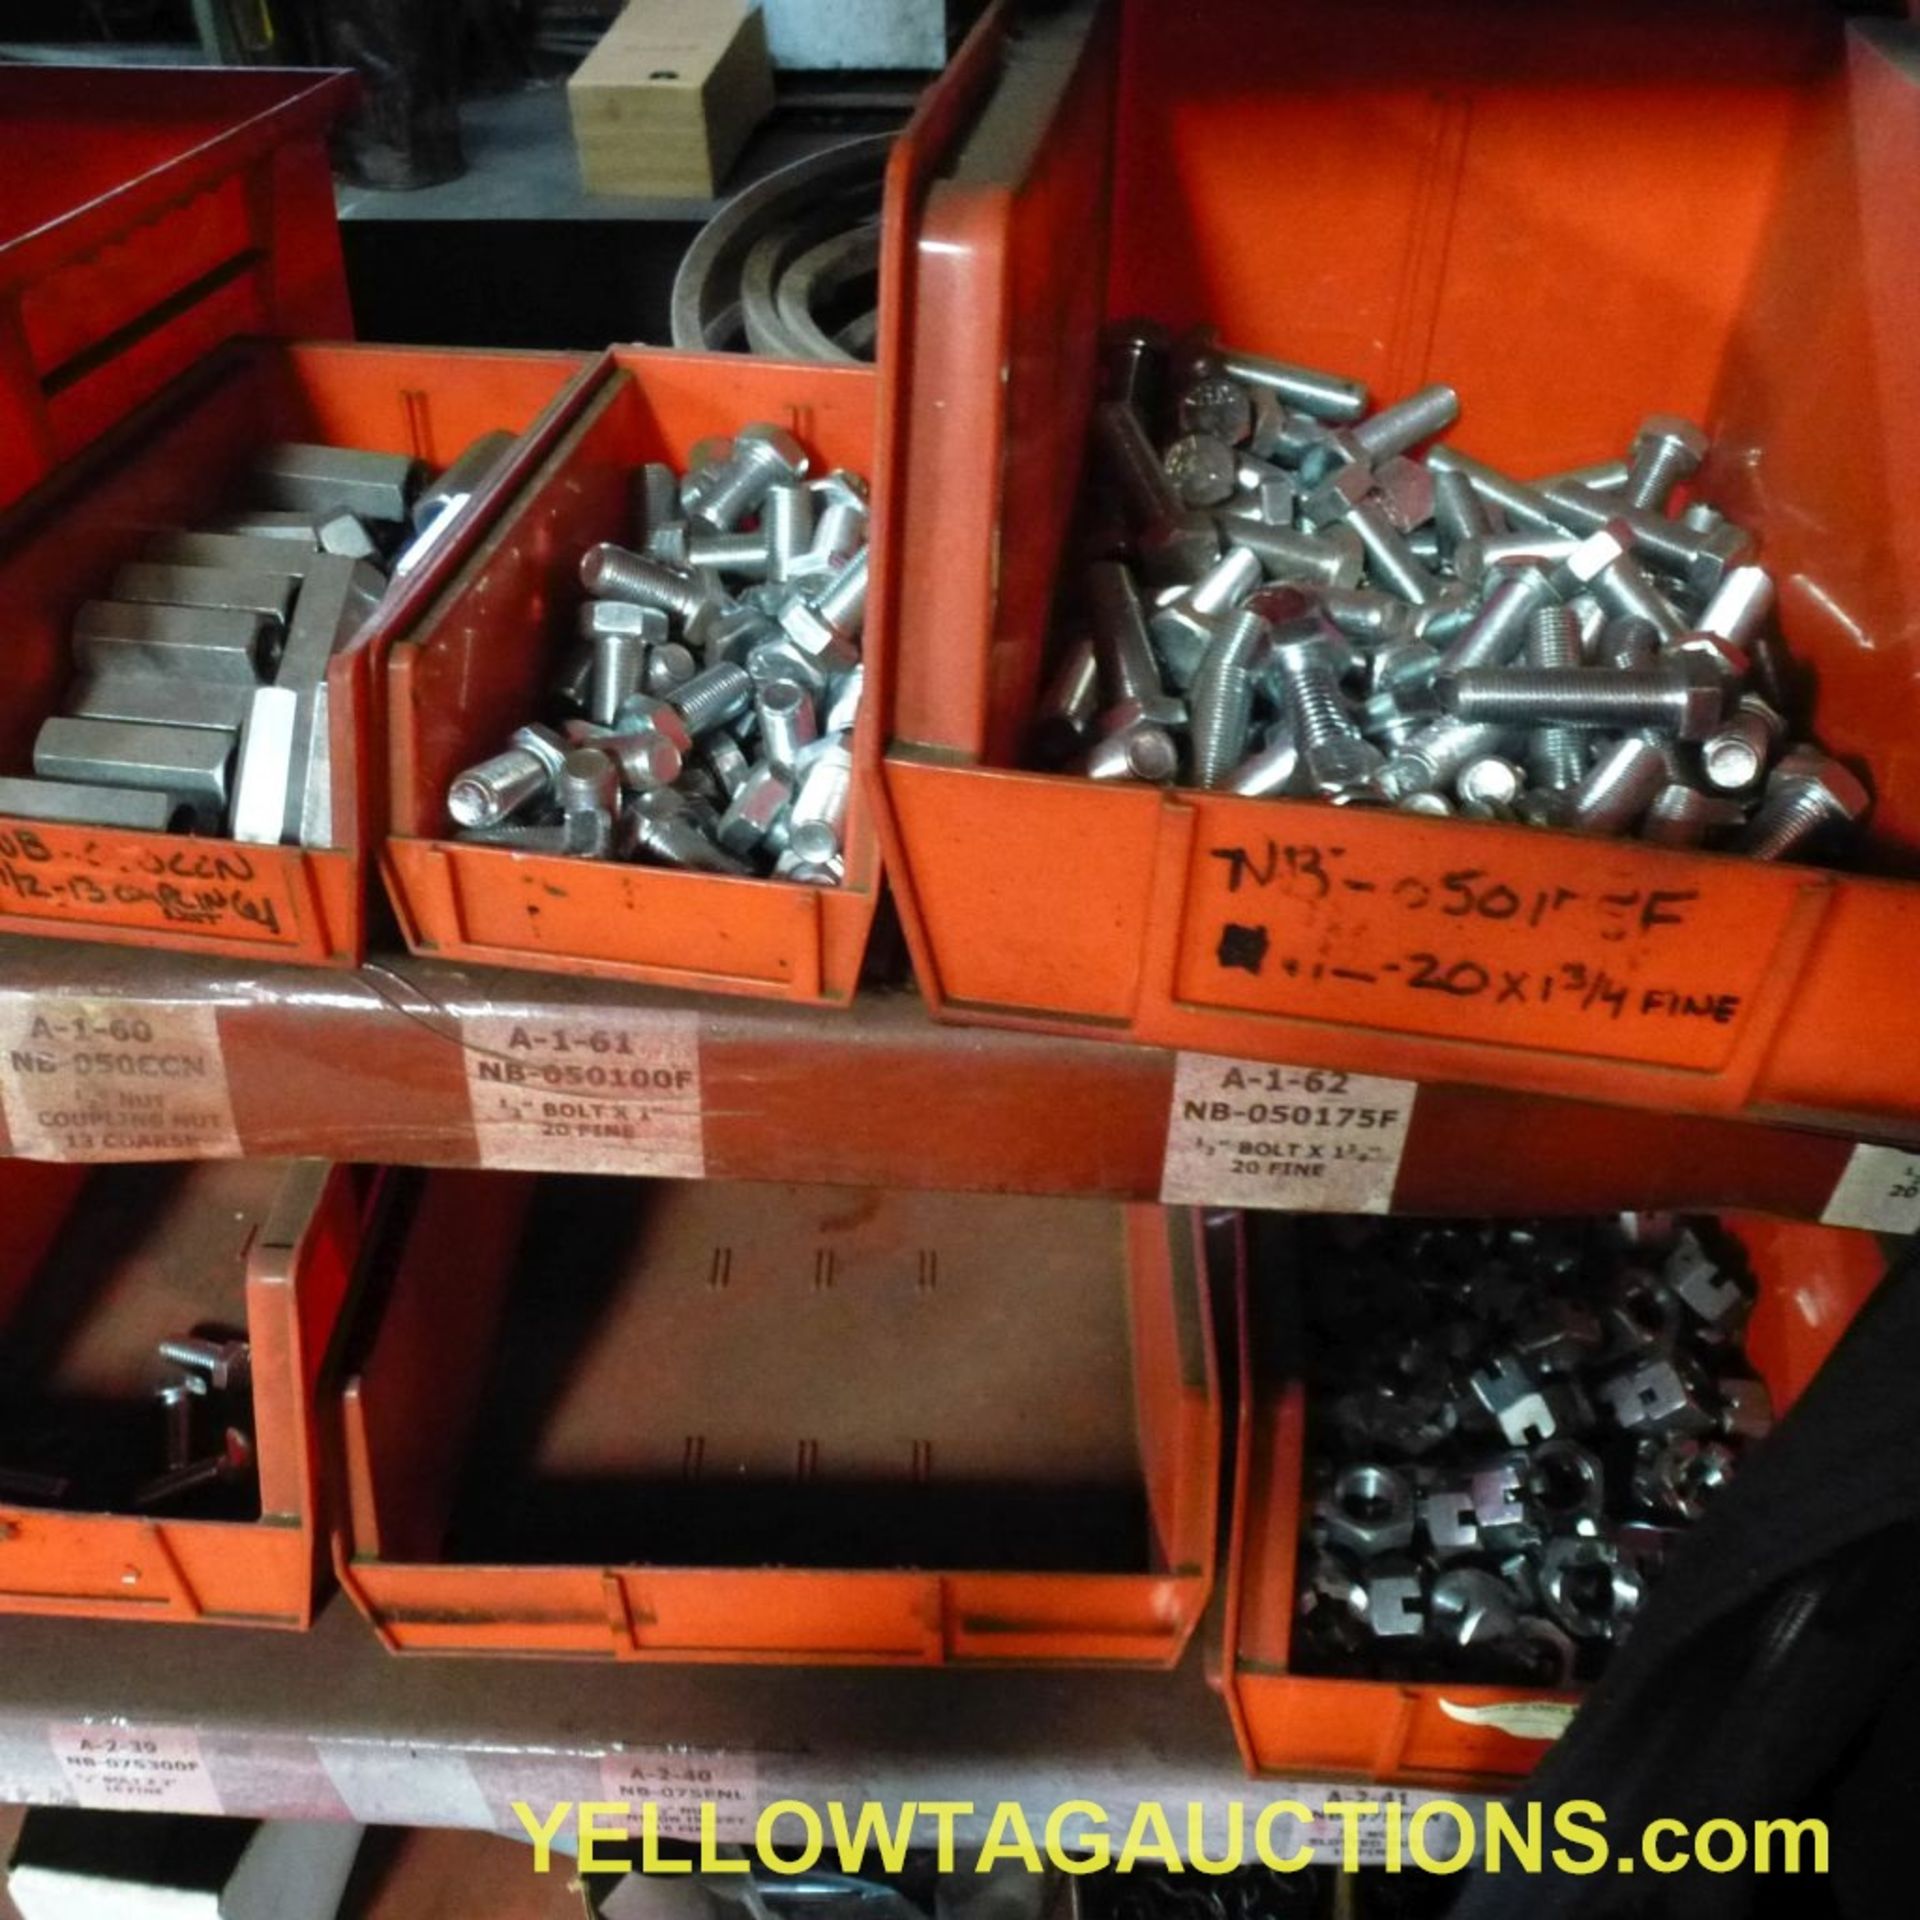 Lot of (3) Shelves with Contents|Includes: Bolt Bins, Hardware, Nuts, Bolts, Washers, Lock - Bild 9 aus 36